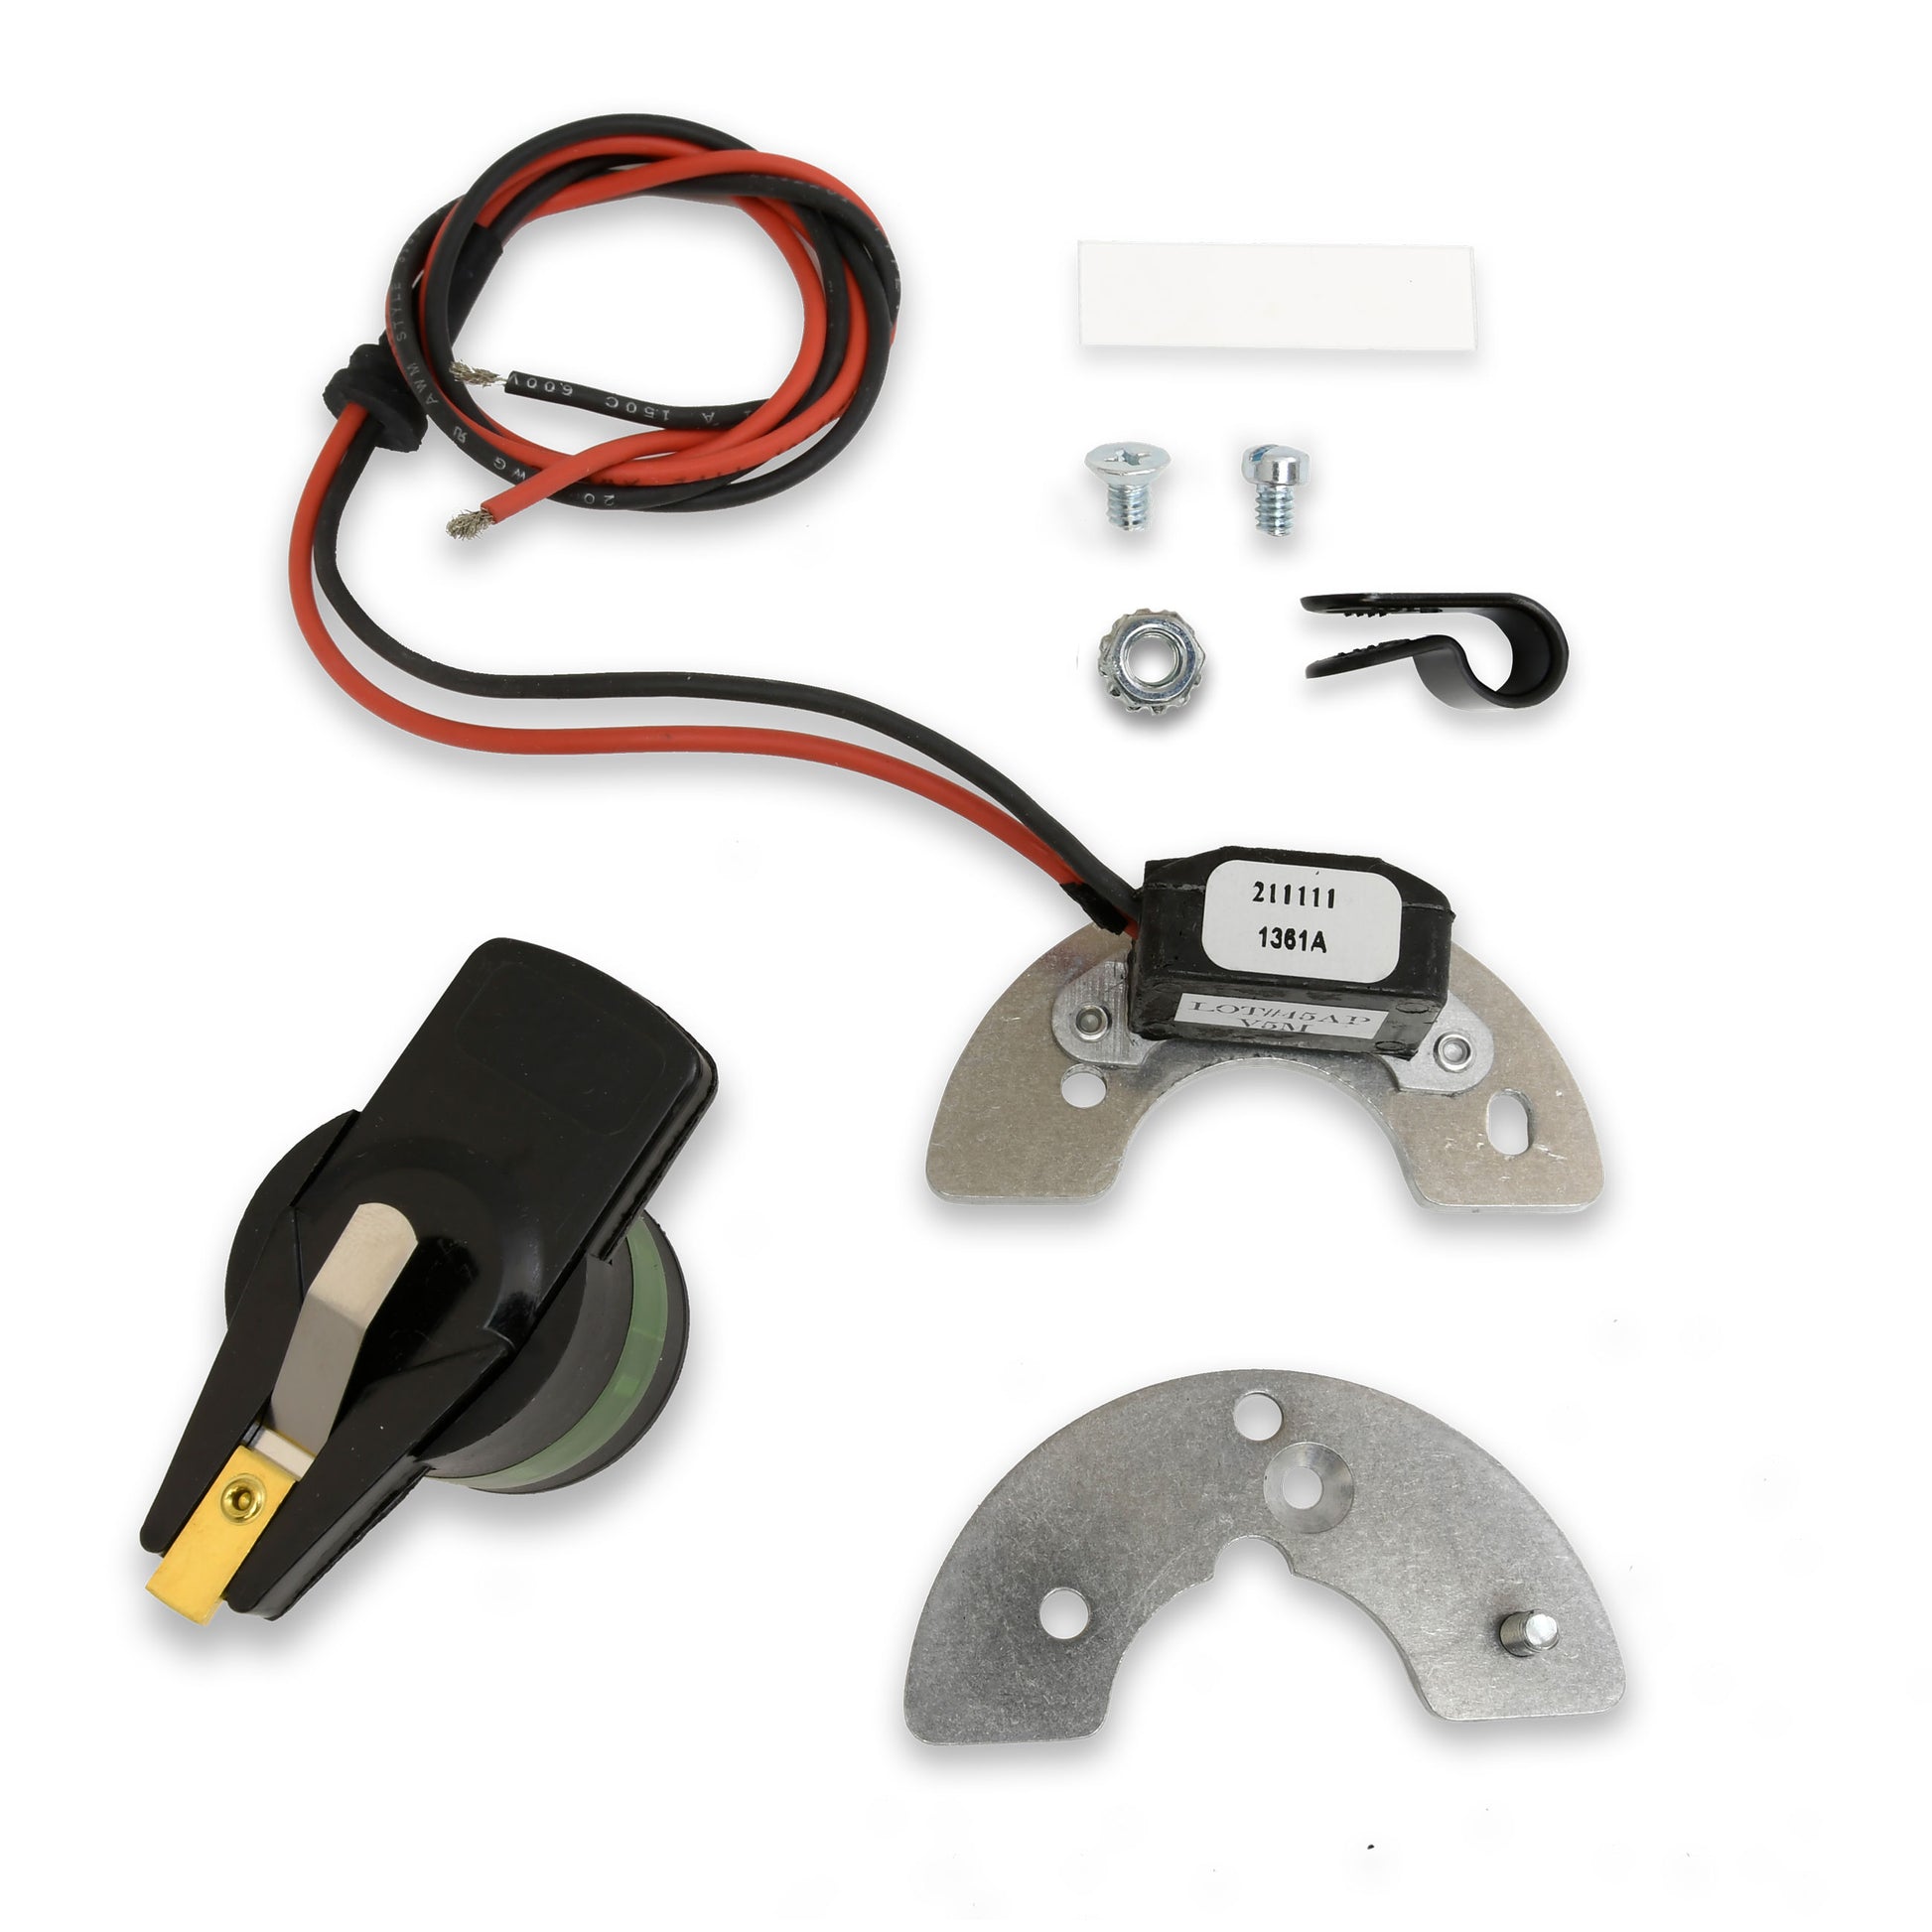 PerTronix Ignitor Electronic Ignition Conversion Kit-1361A
